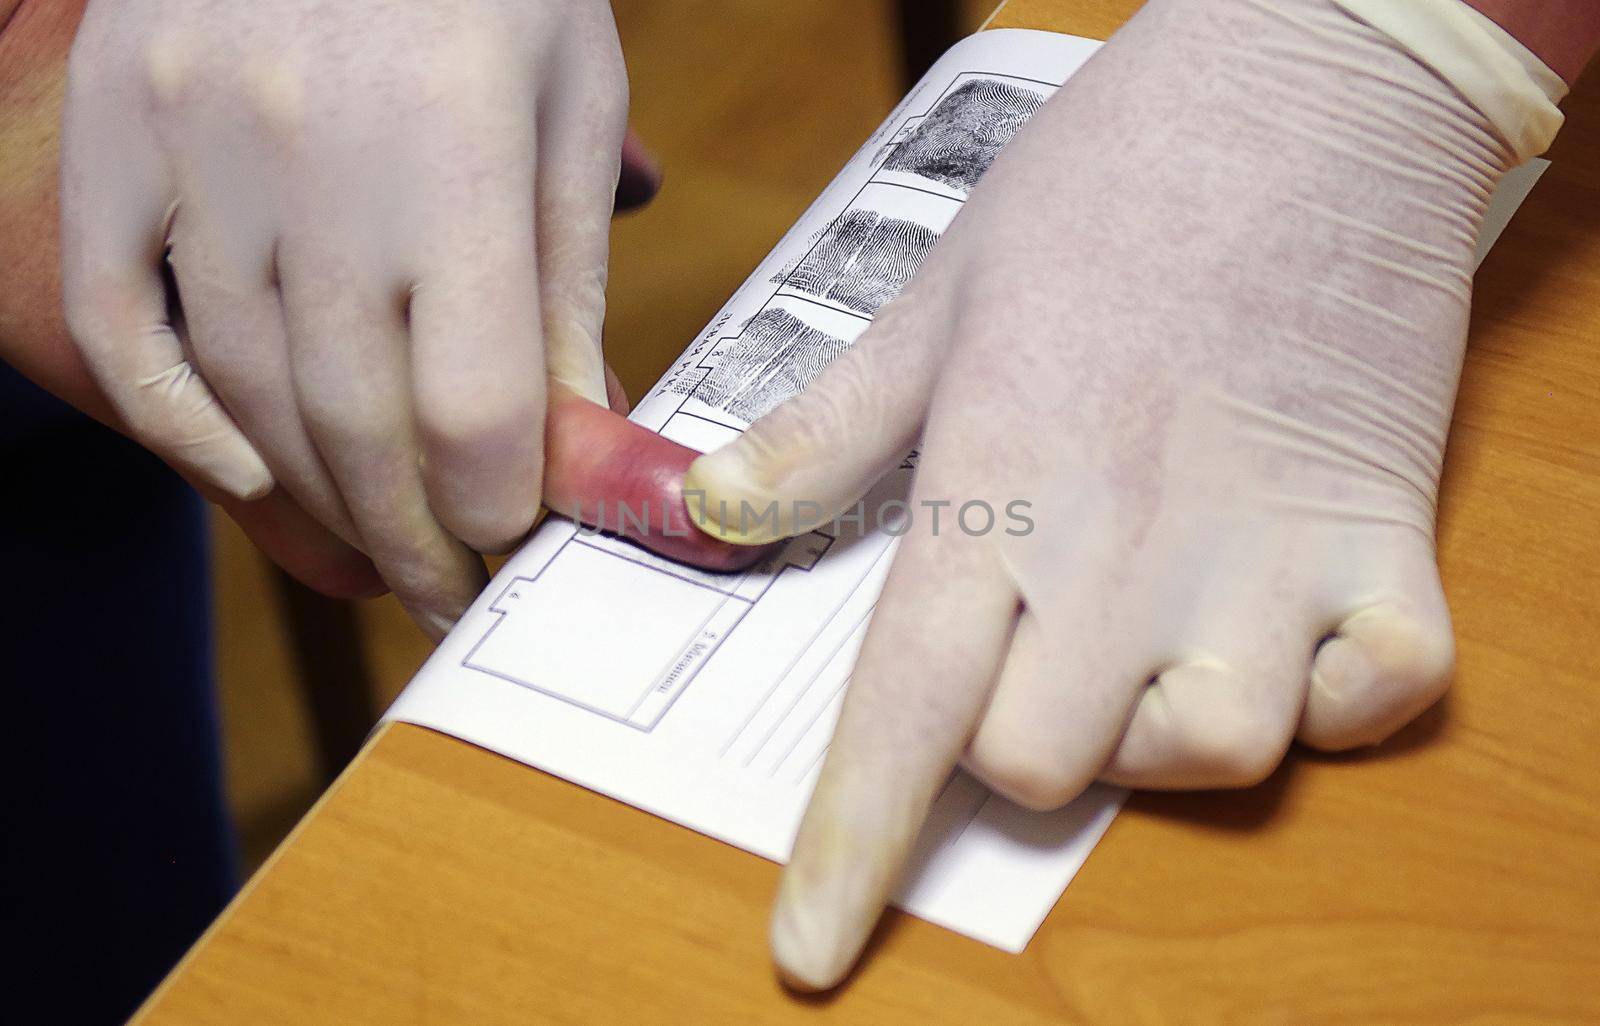 A police officer wearing rubber gloves takes a fingerprint of a suspect. by fifg